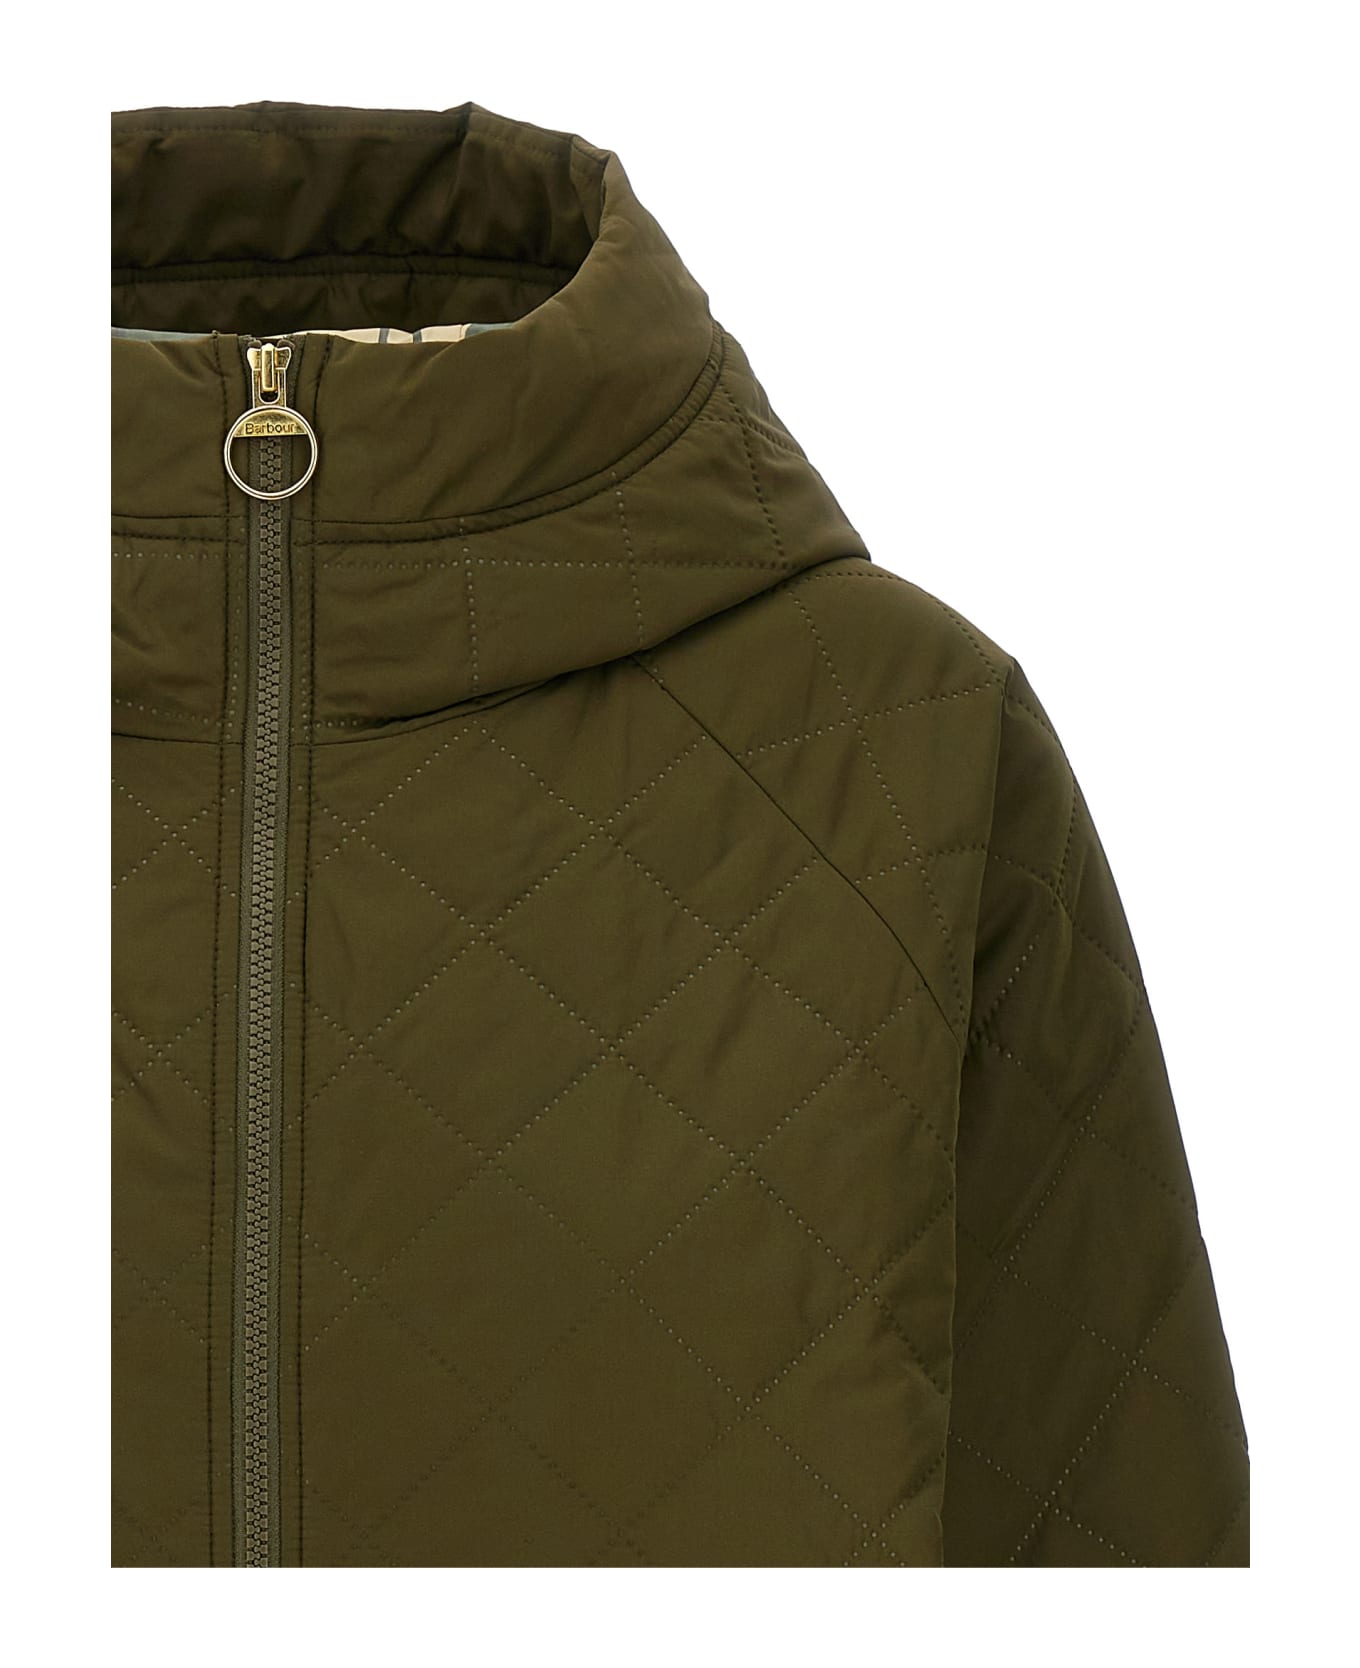 Barbour 'glamis' Hooded Jacket Barbour - Militare